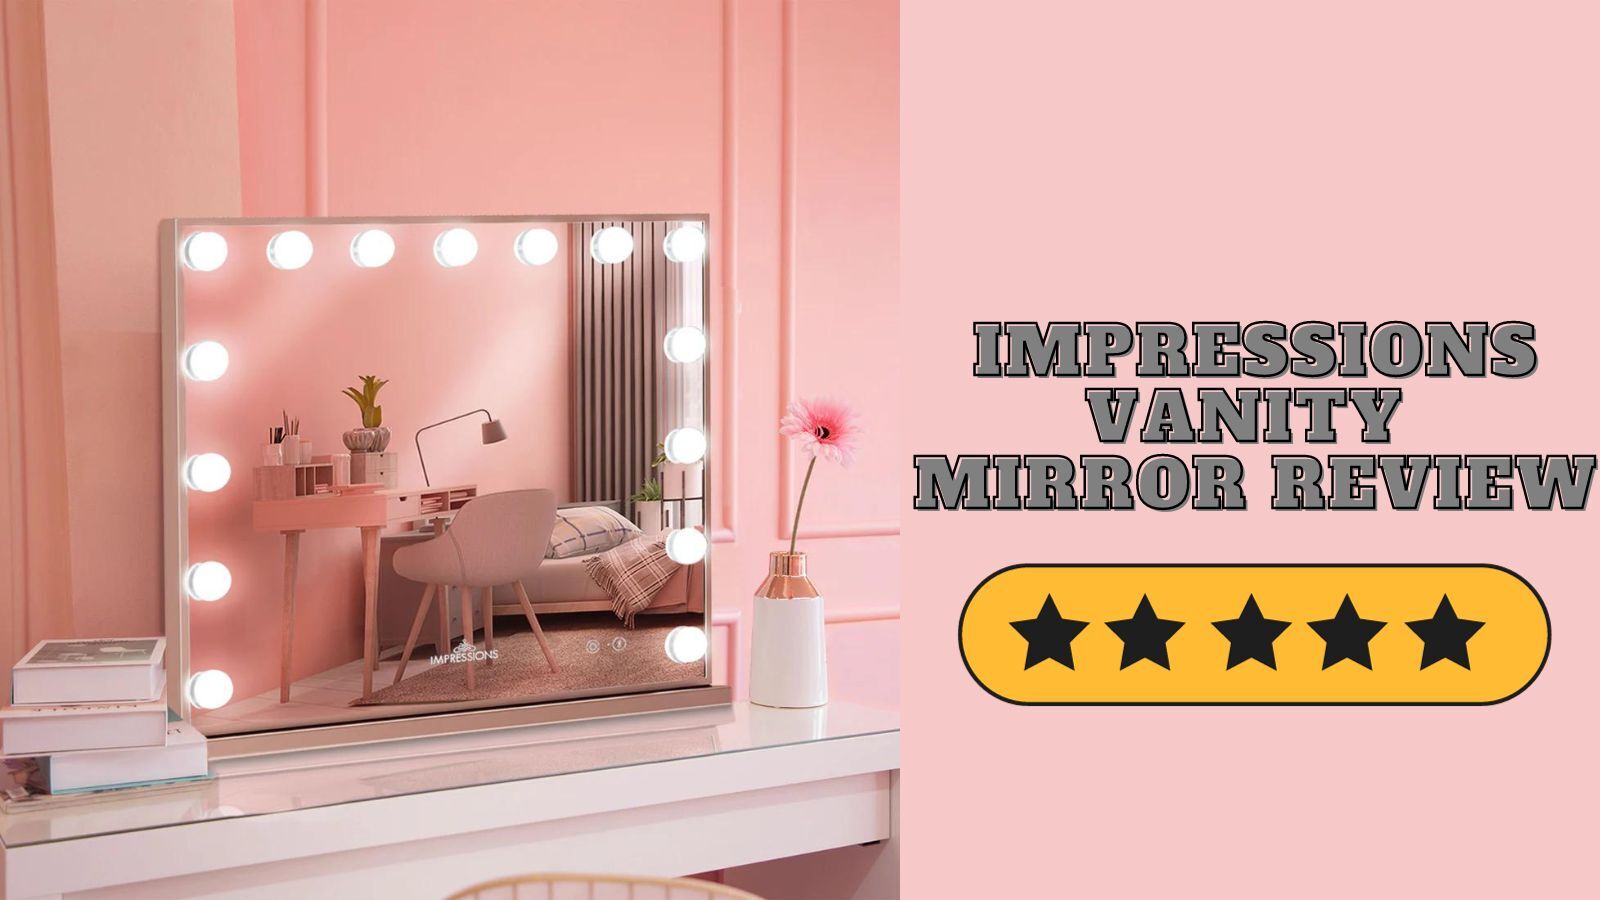 Impressions Vanity Mirror Review: Glamorous and Chic Beauty Stations for Every Enthusiast